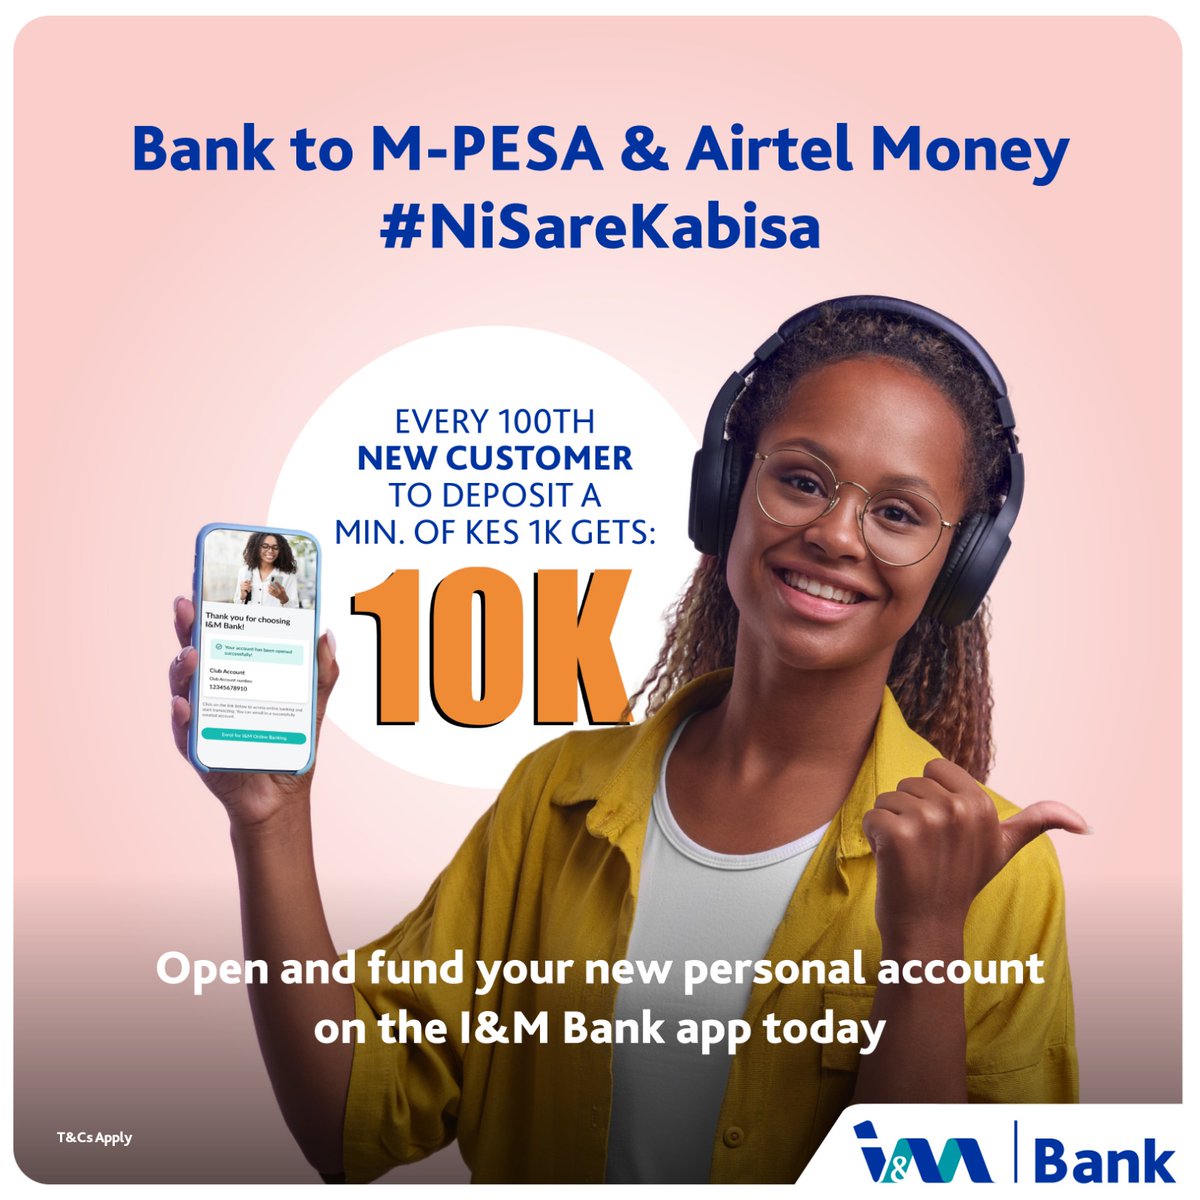 Open an IM Bank personal account, deposit 1k, and if you're our 100th customer, you could walk away with a generous 10k open your IM Bank Account through the I&M Bank On The Go app and indulge in the added benefit of Free Bank to MPESA

#NiSareKabisa